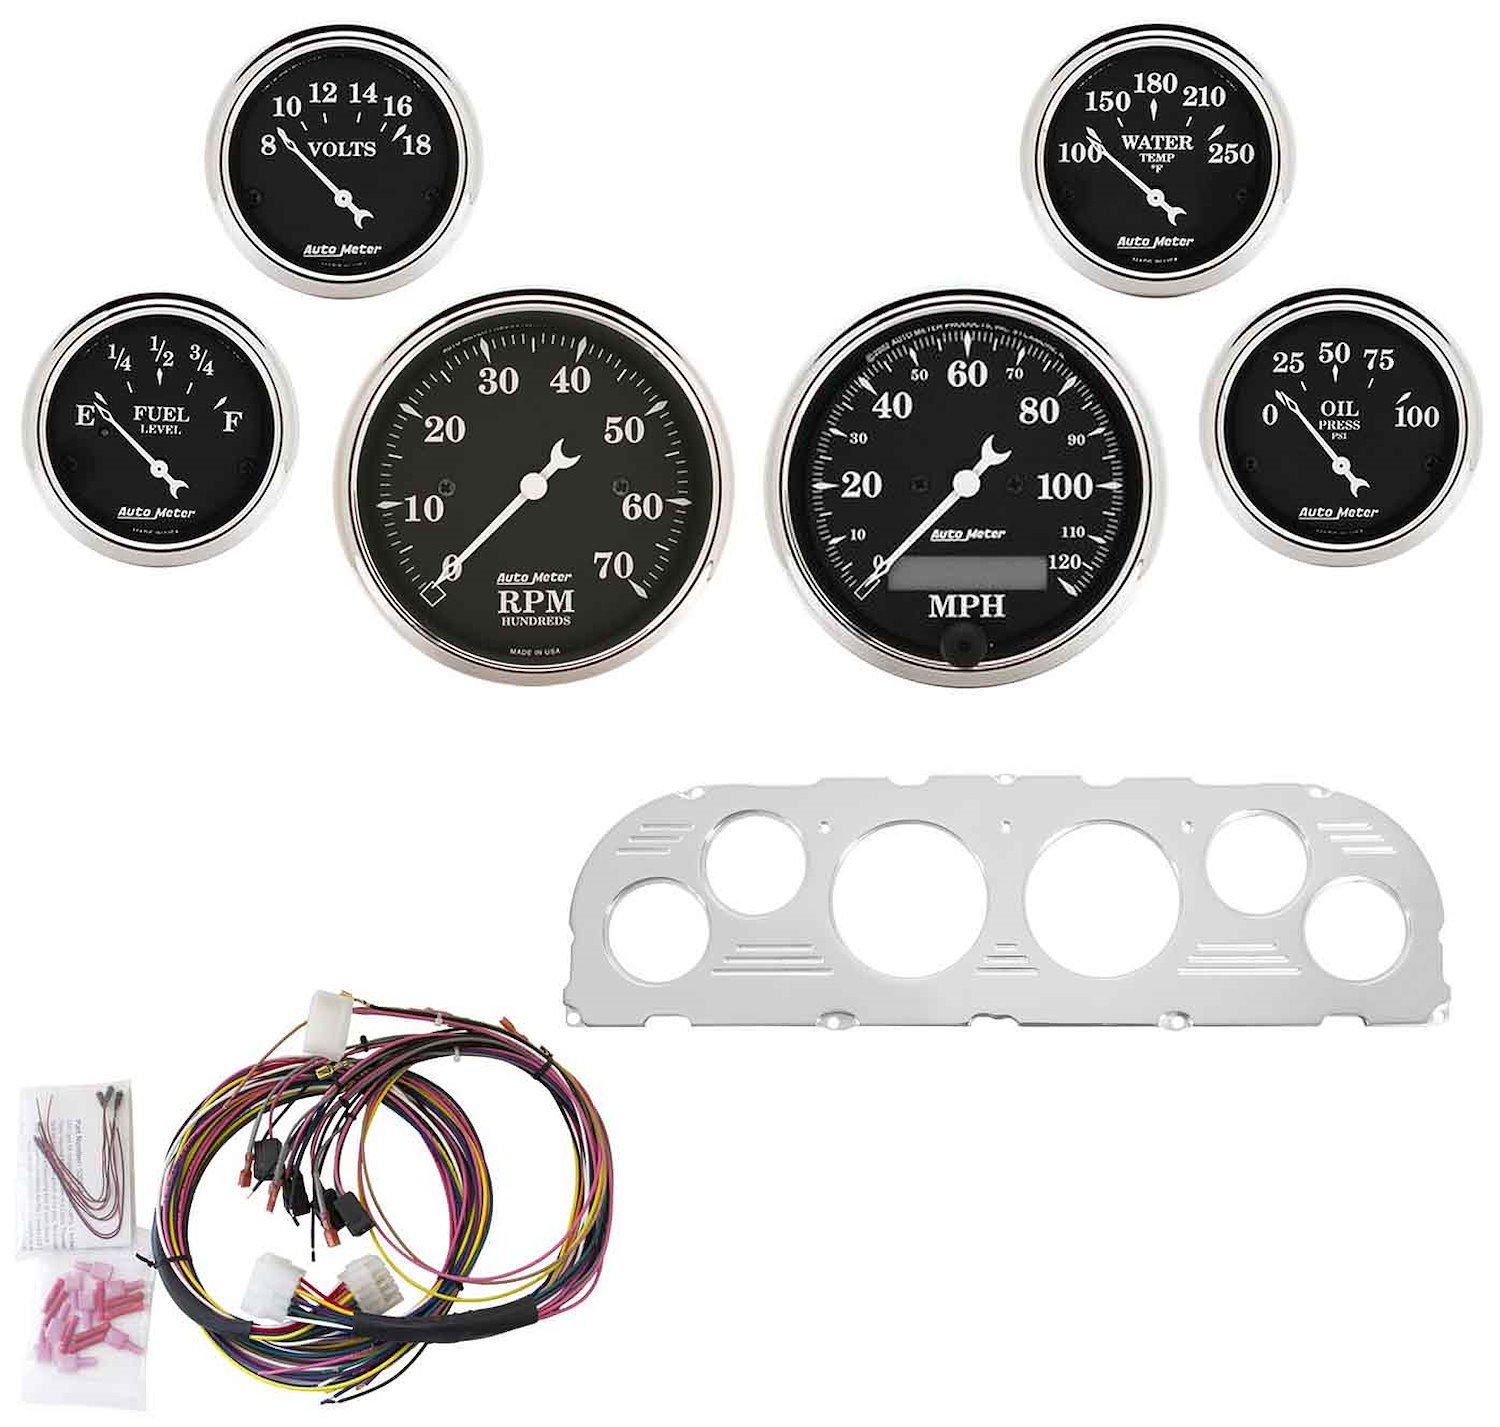 6-Gauge Direct-Fit Dash Kit 1960-1963 Chevy Truck - Old Tyme Black Series - Polished Panel